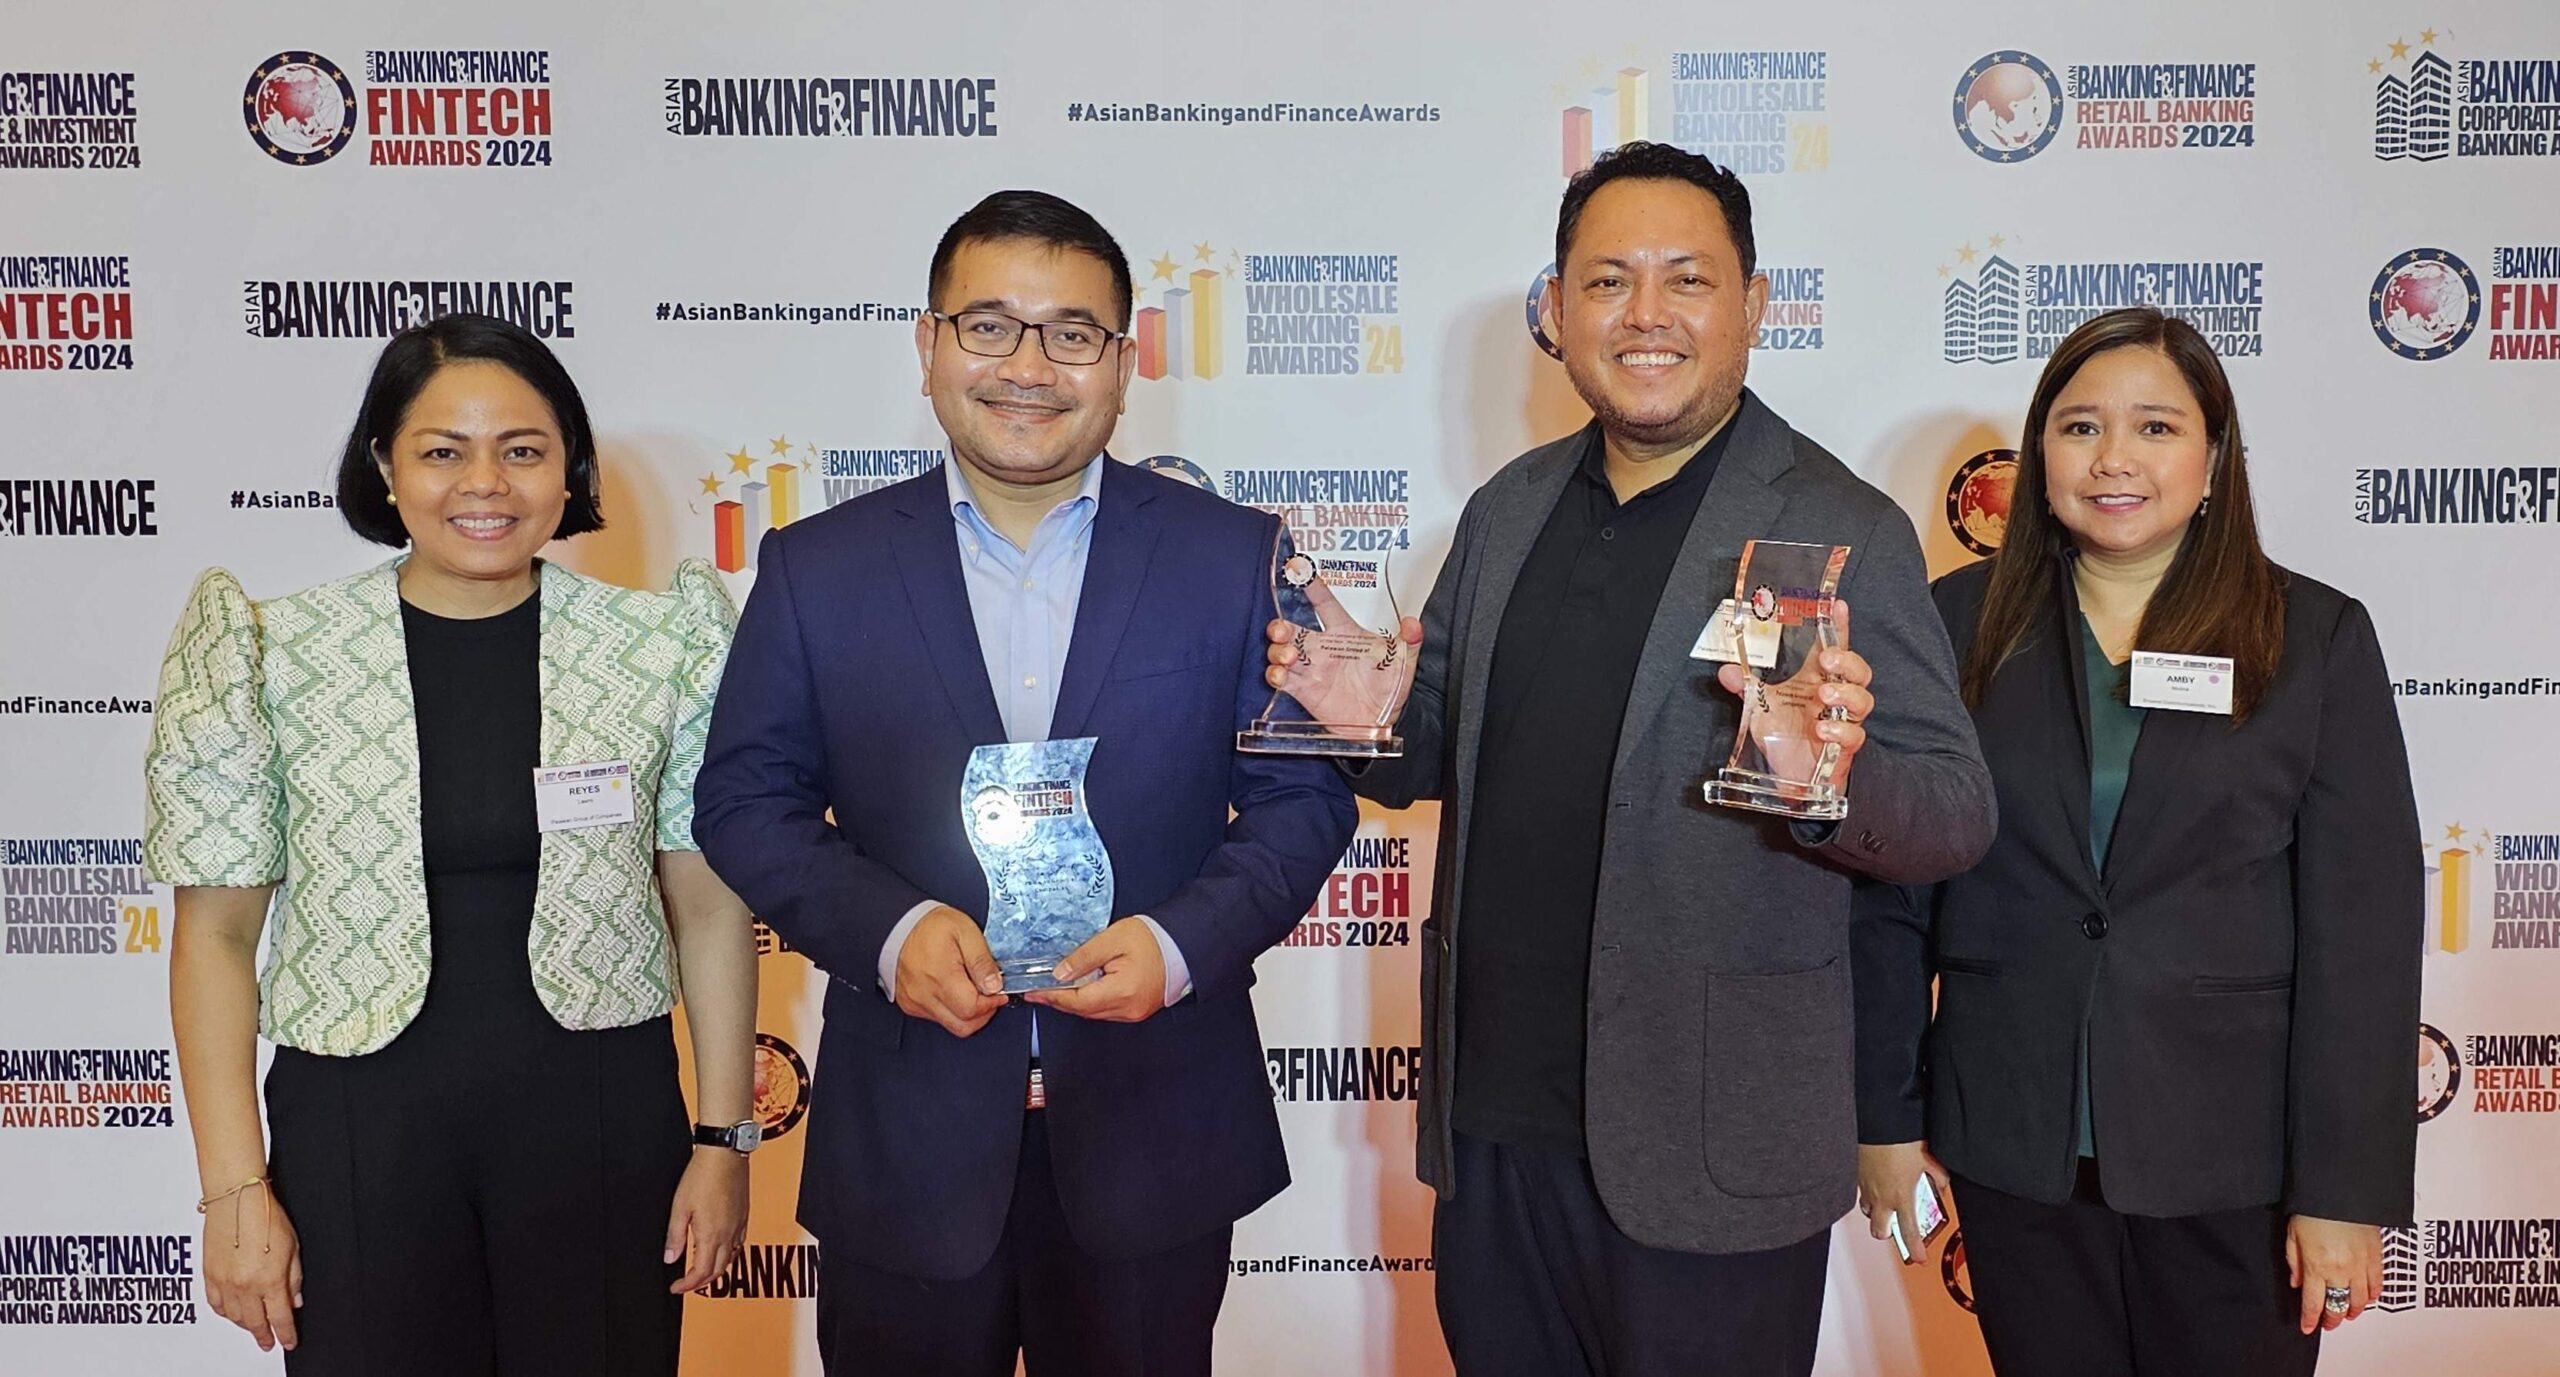 Palawan Group of Companies was lauded for championing financial inclusion and innovation at the Asian Banking Finance (ABF) Fintech and Retail Awards 2024. From left to right_ Laarni Reyes, Managing Partner of Browne Communications; Third L